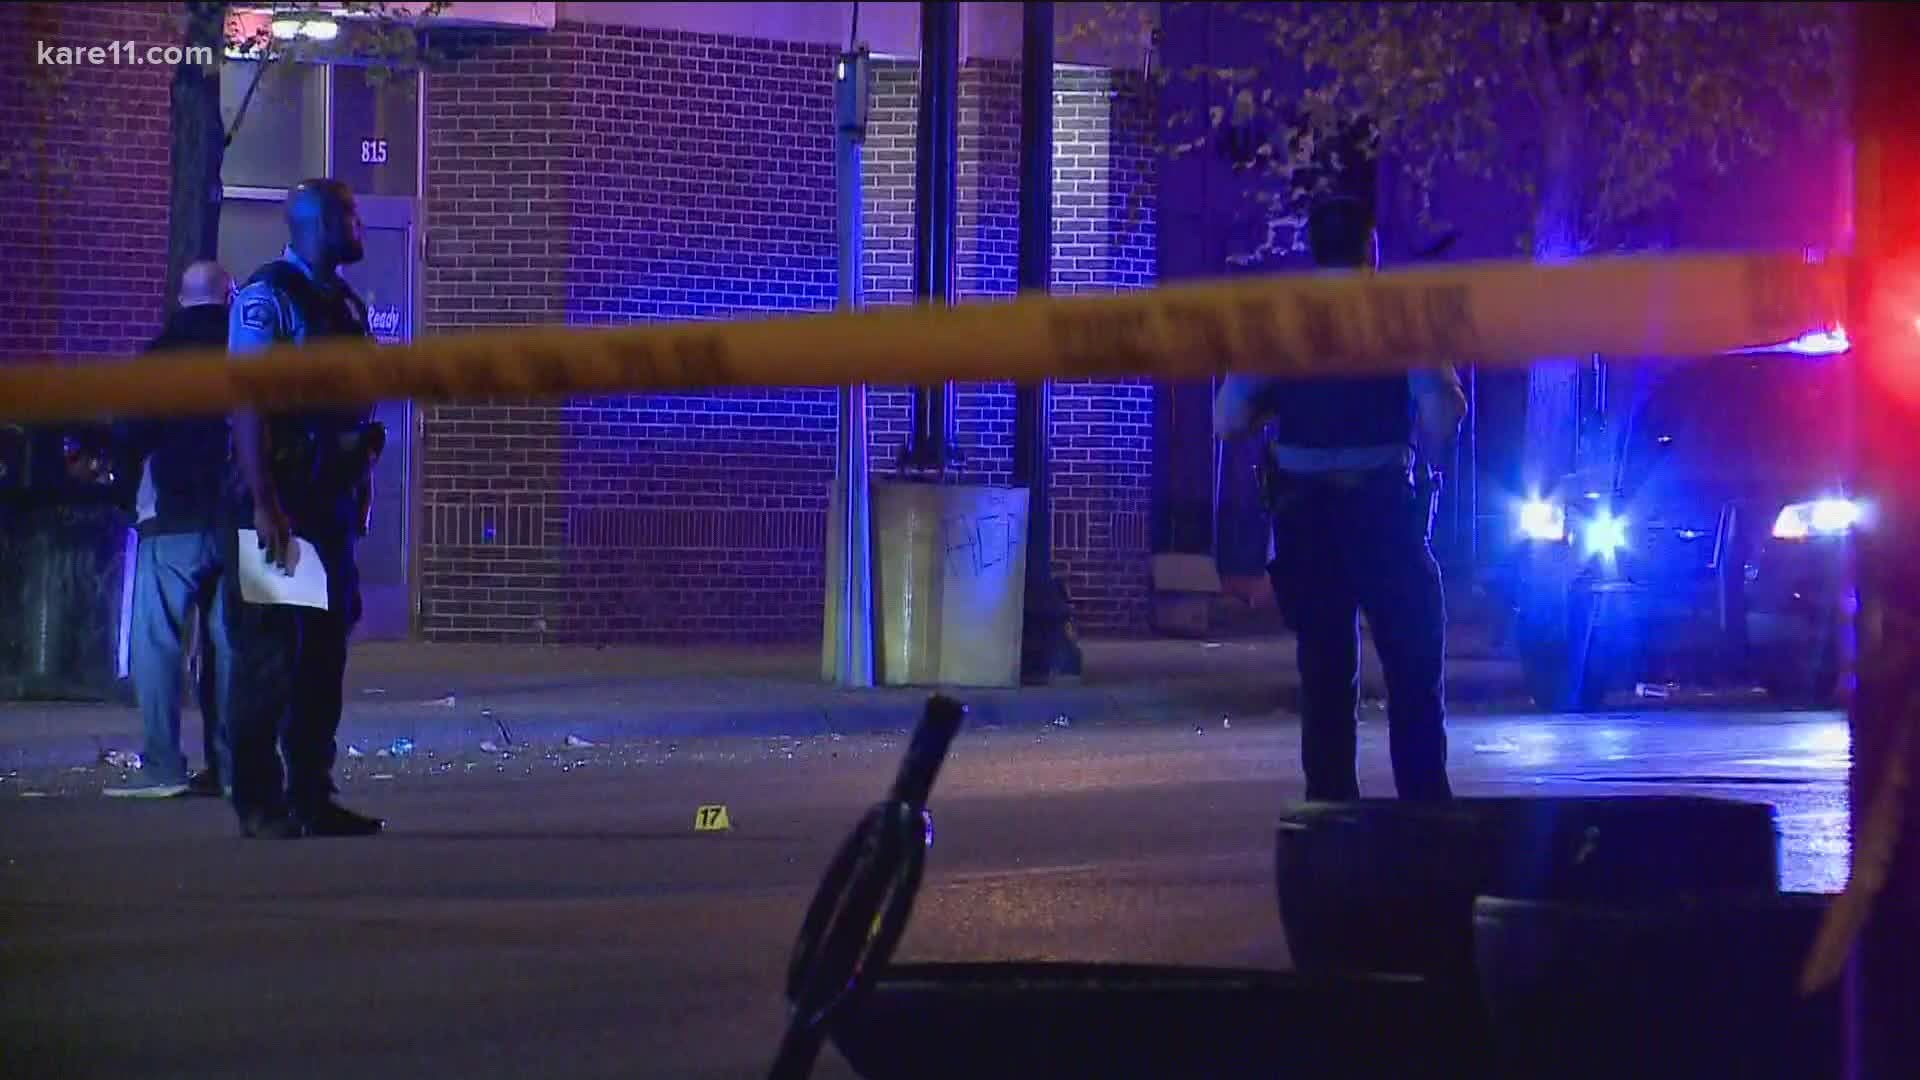 Police said a man was fatally shot and a woman in critical condition after being struck by a car